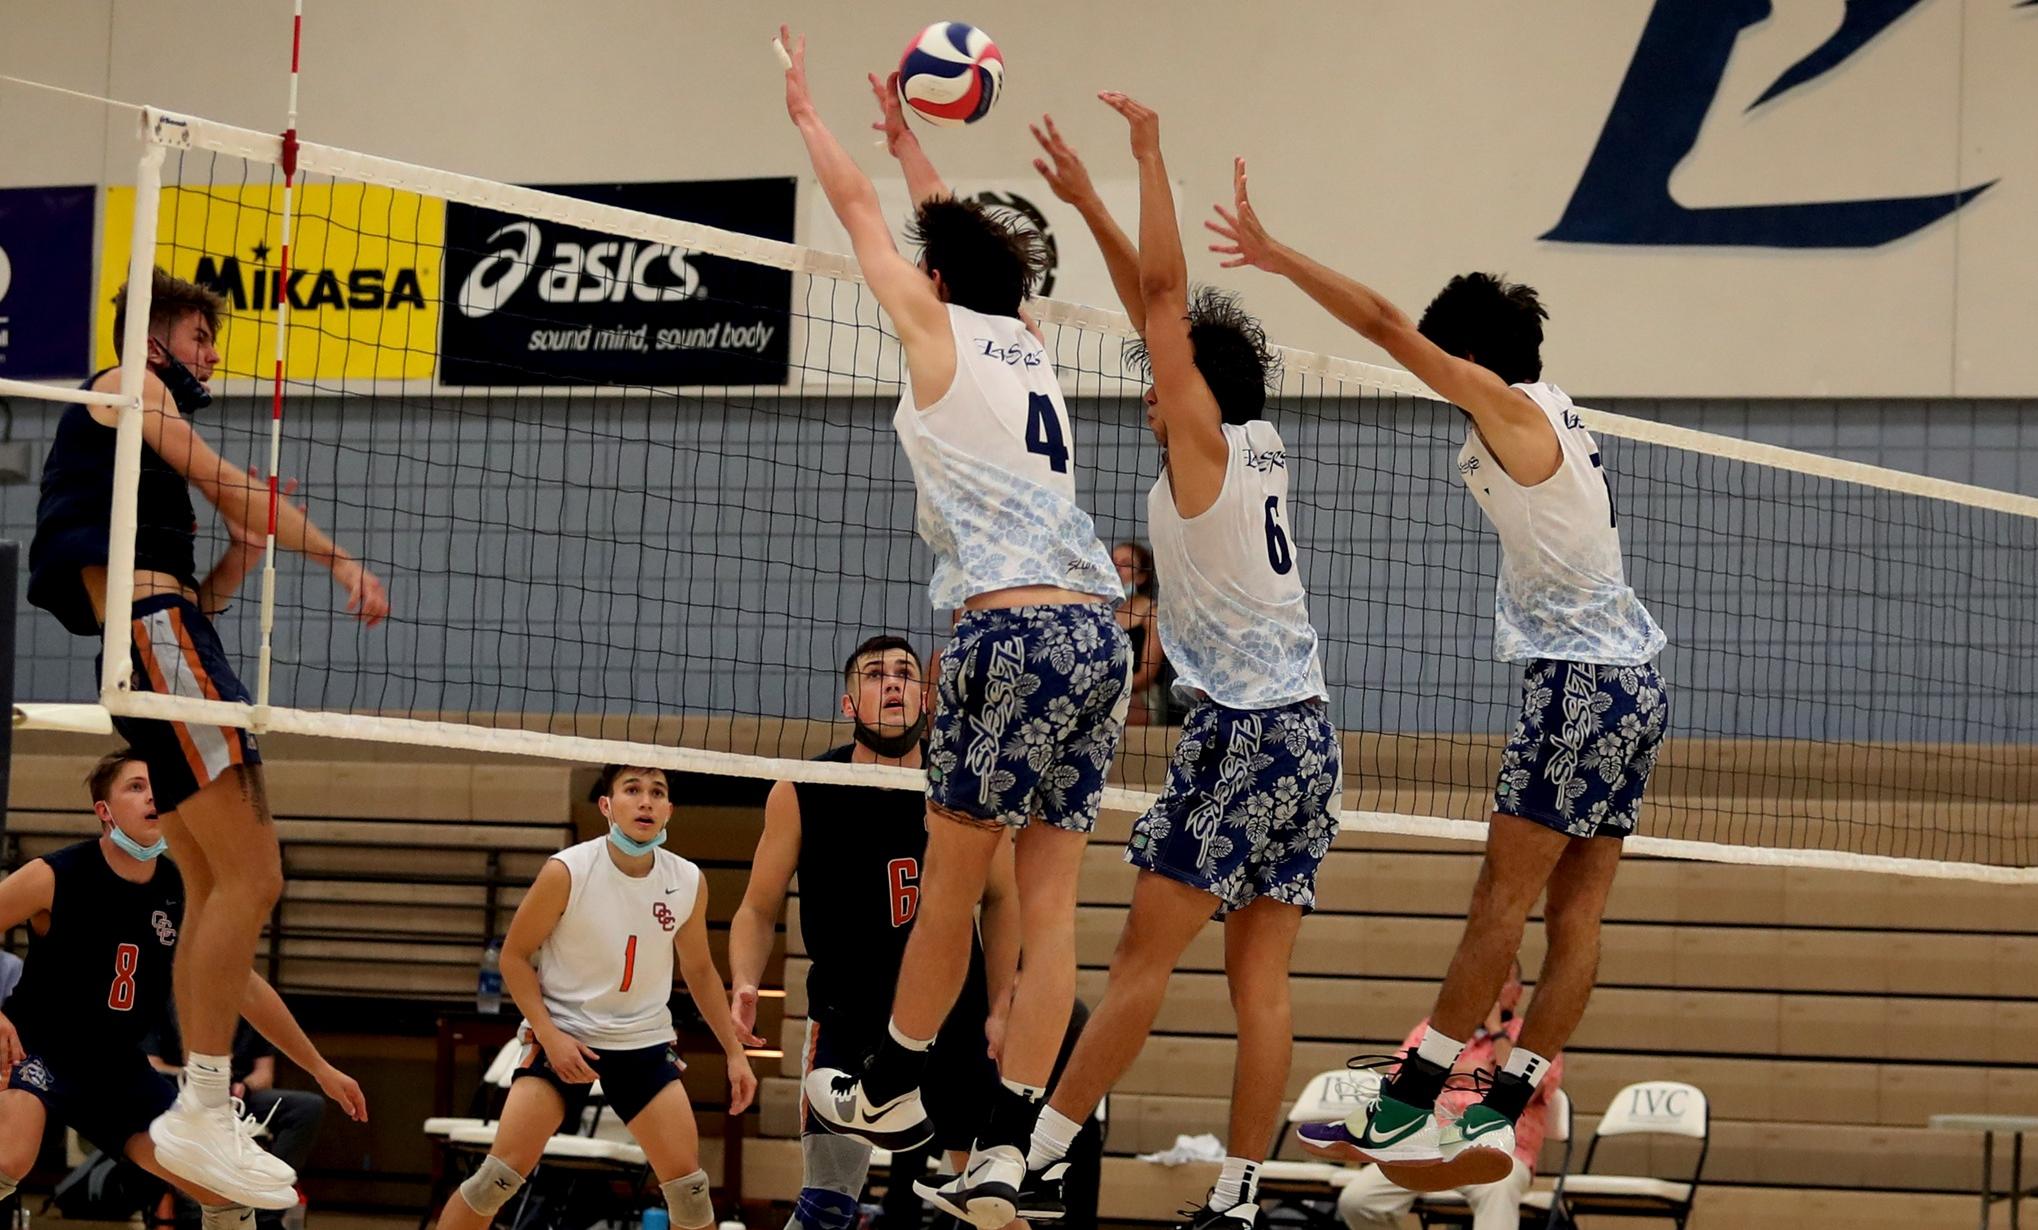 Men's volleyball team takes on OCC in conference tourney final